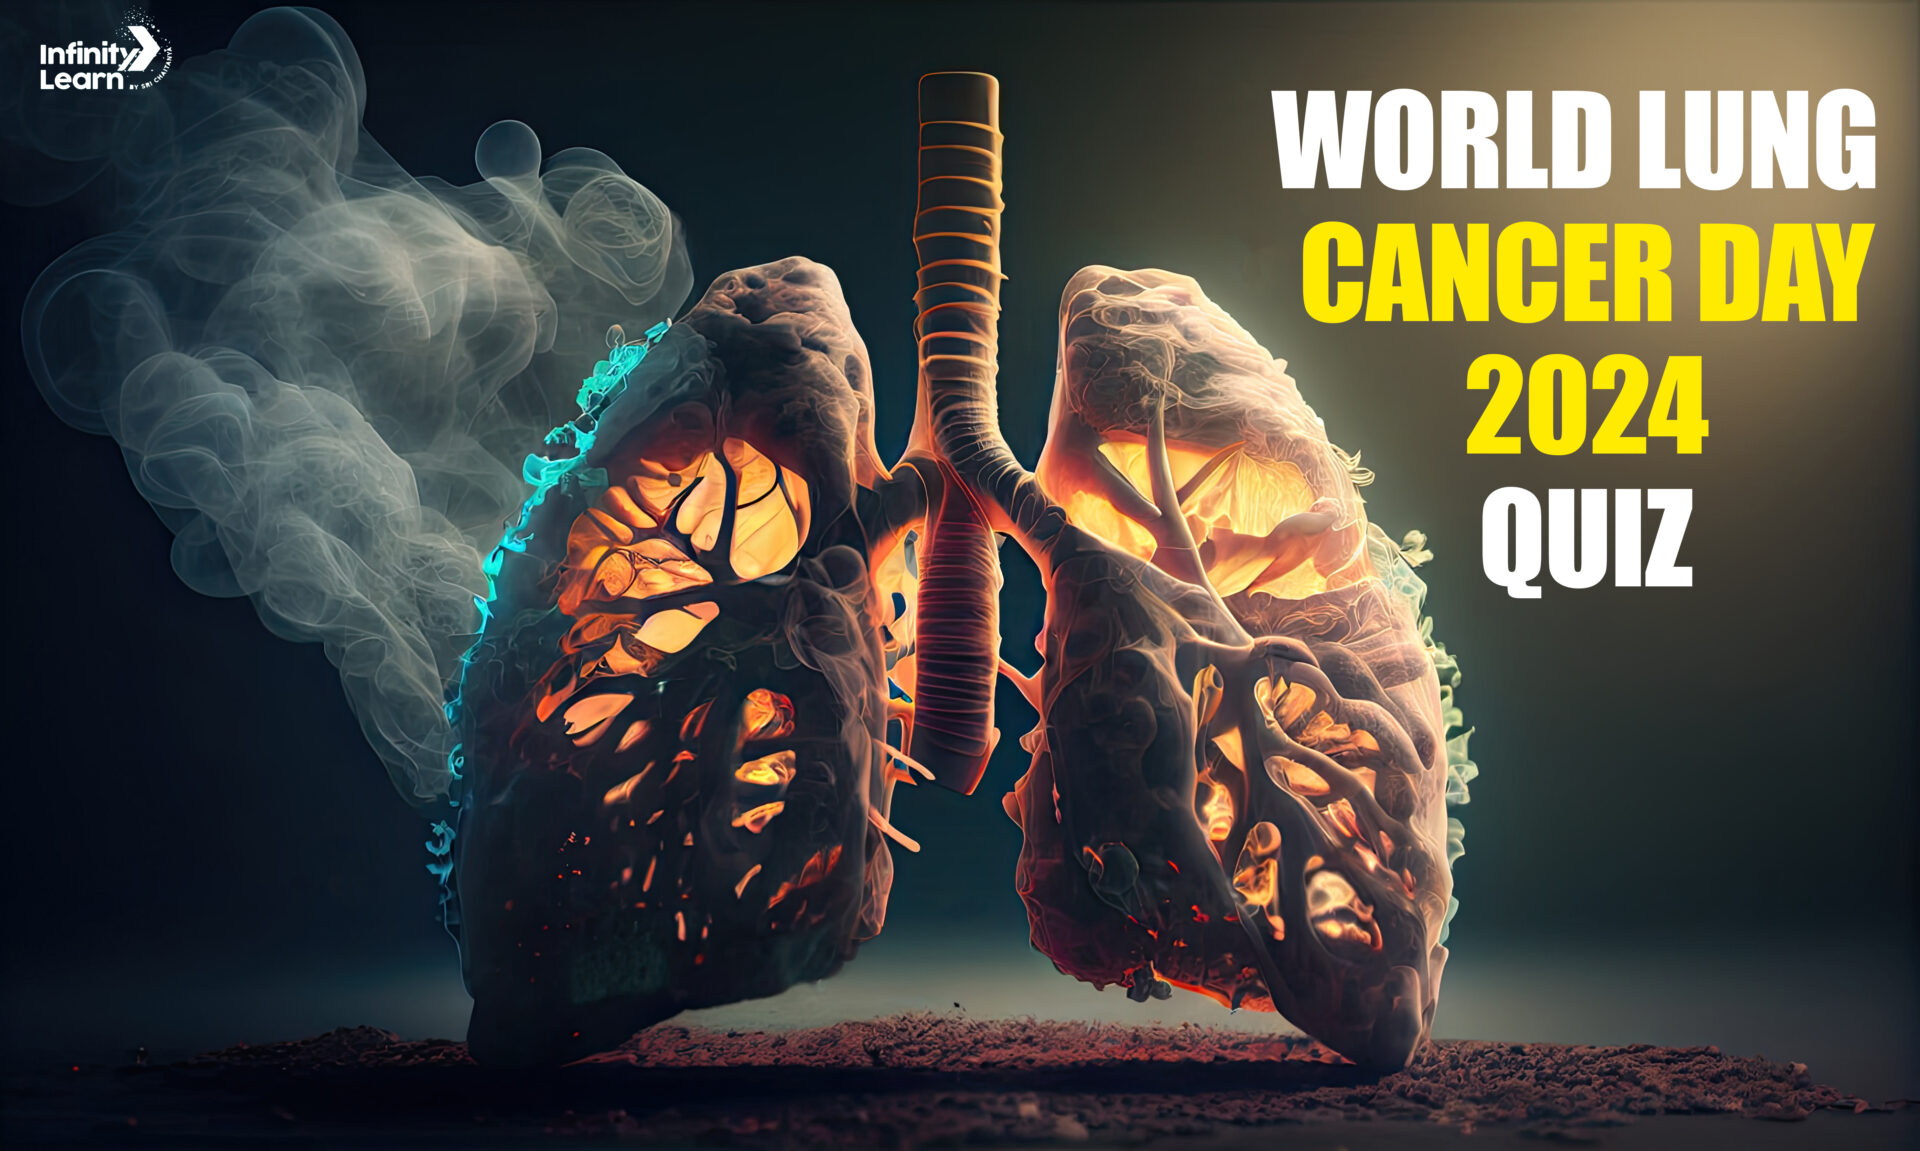 World Lung Cancer Day 2024